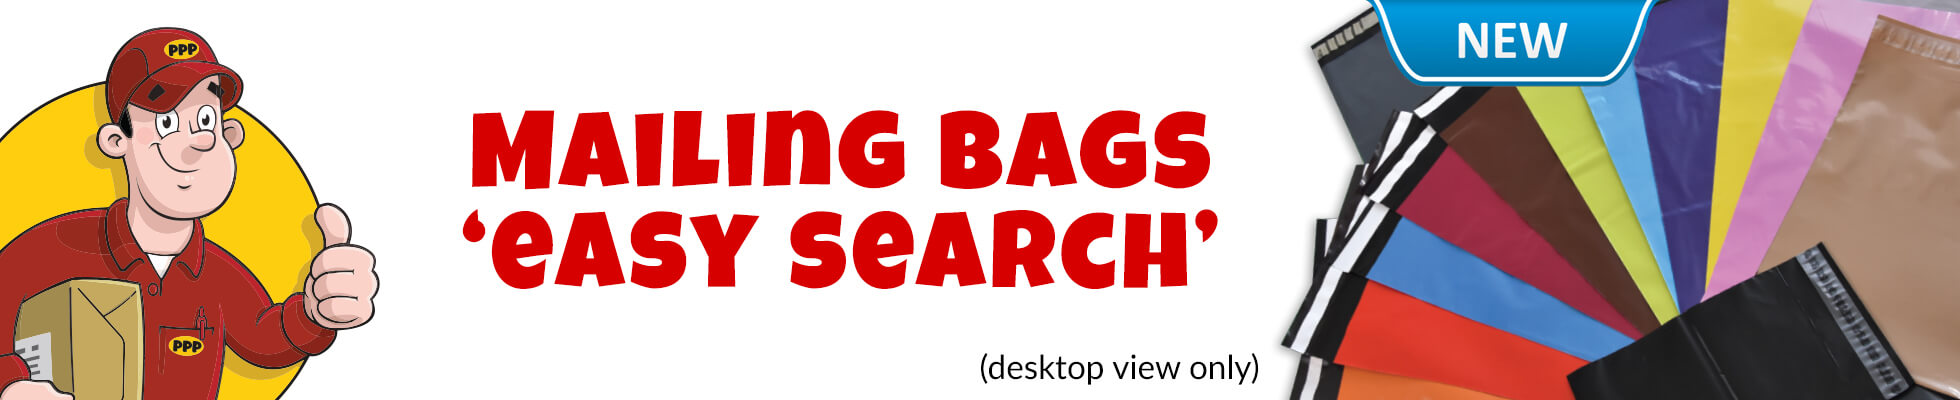 Mailing Bags - Easy Search